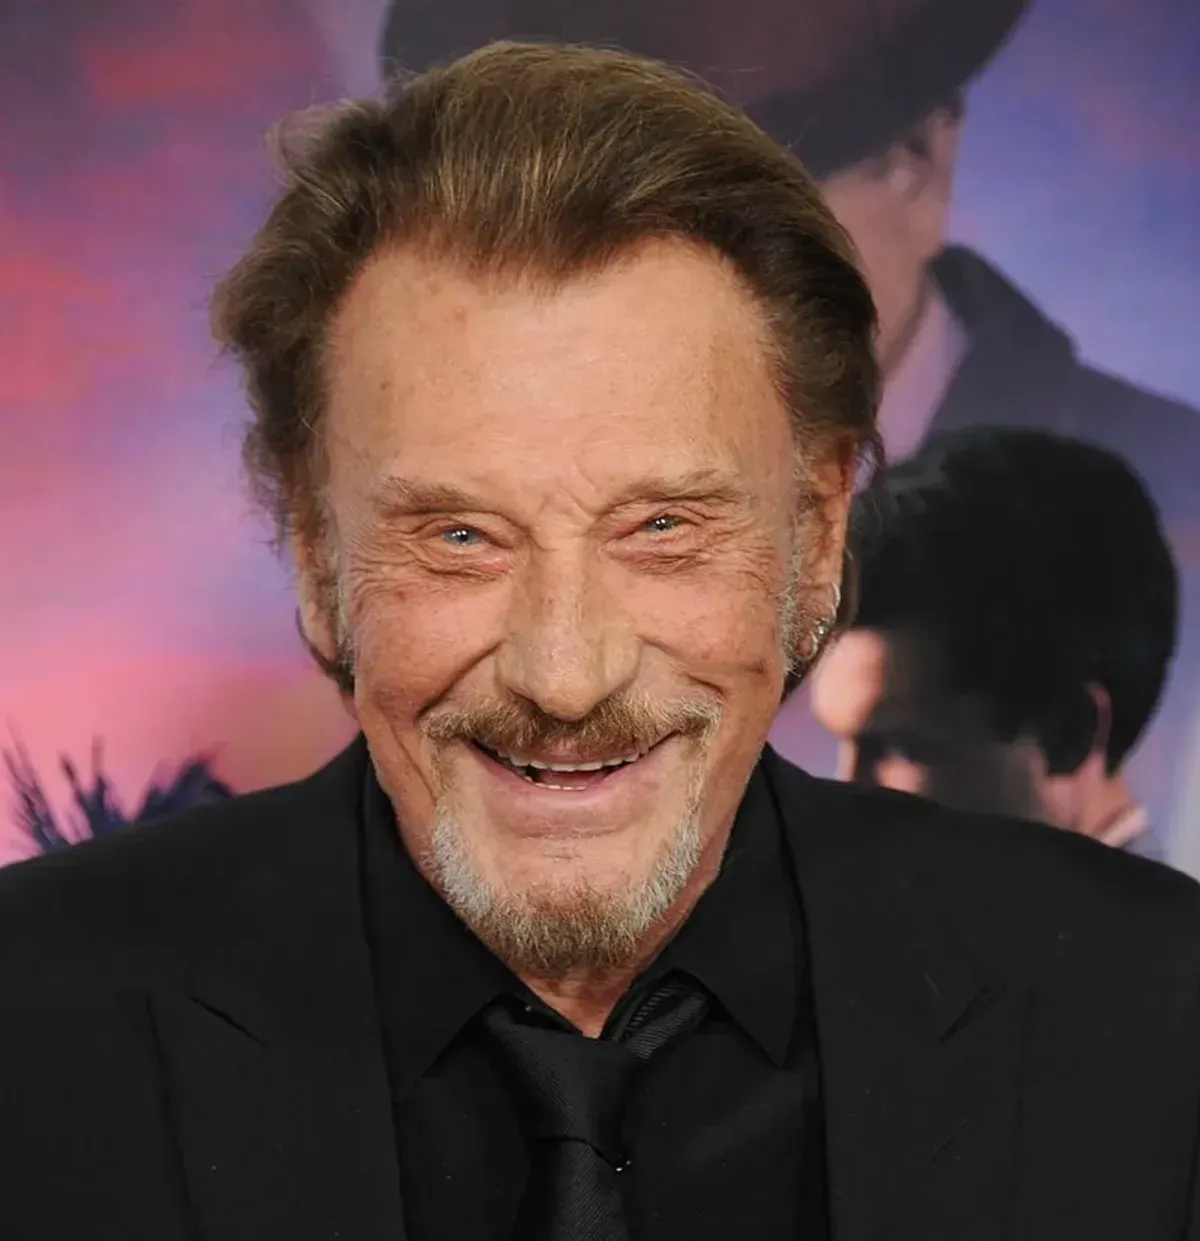 Johnny Hallyday souriant. | Photo : Getty Images